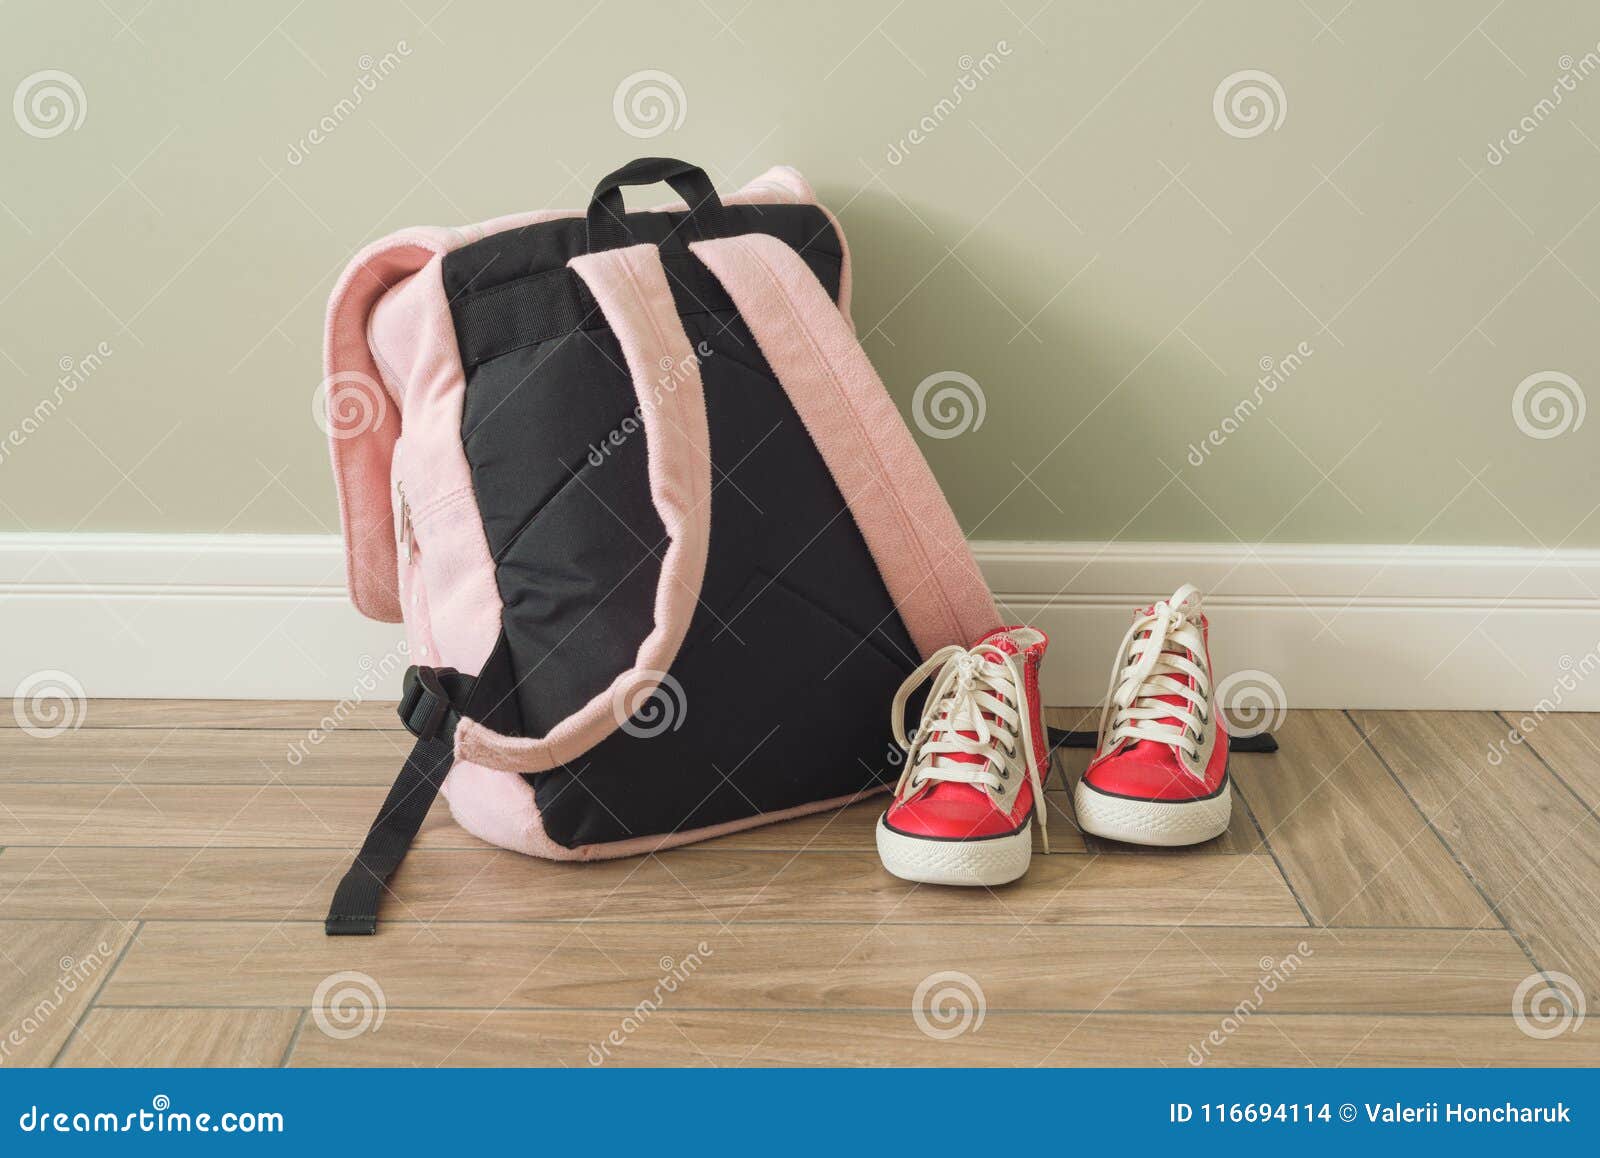 Child Bank episode School Backpack and Sneakers on the Floor in Home Interior Stock Photo -  Image of luggage, composition: 116694114